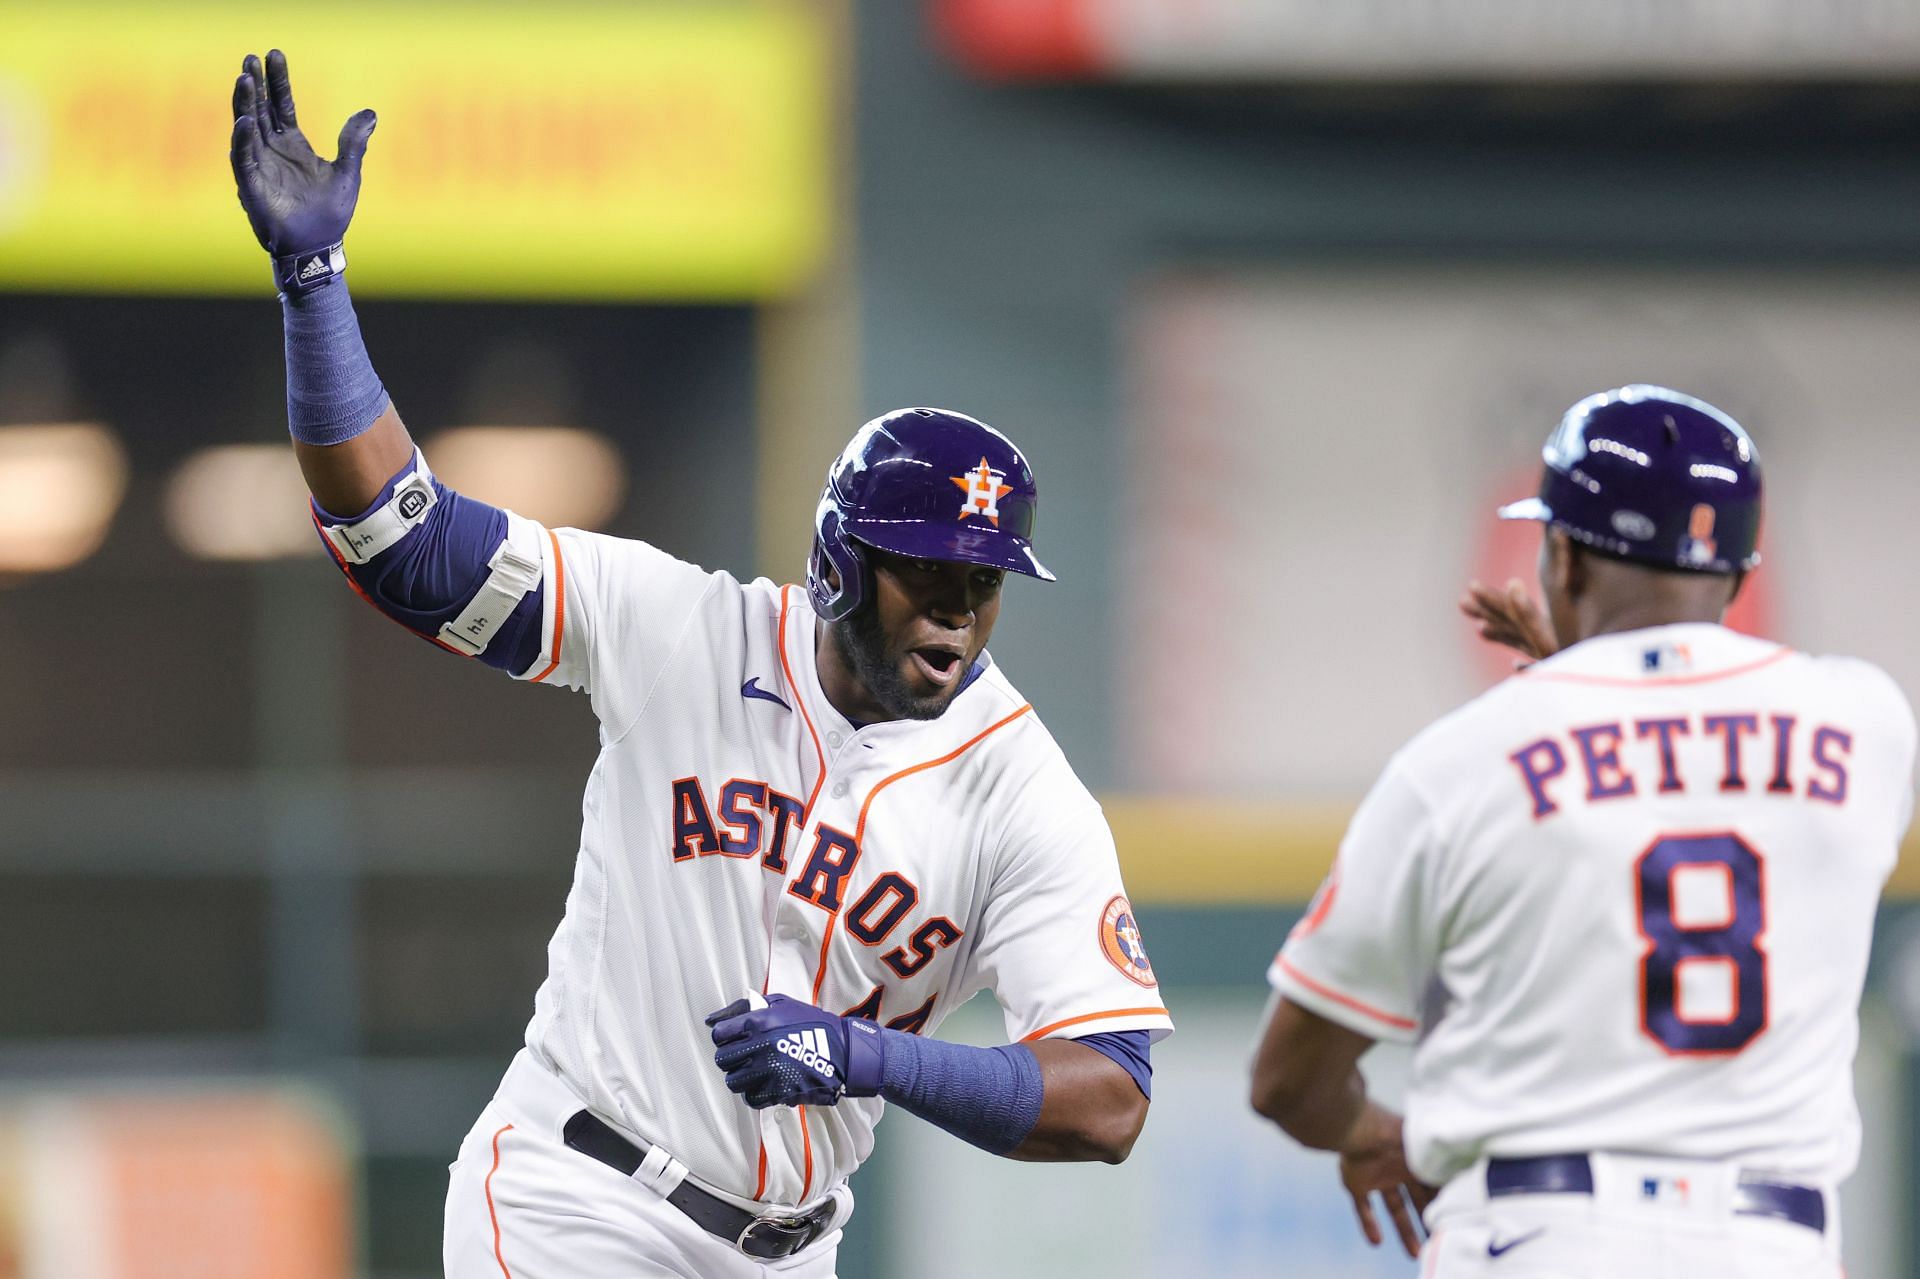 Yordan Alvarez of the Houston Astros after hitting a solo home run against the New York Mets